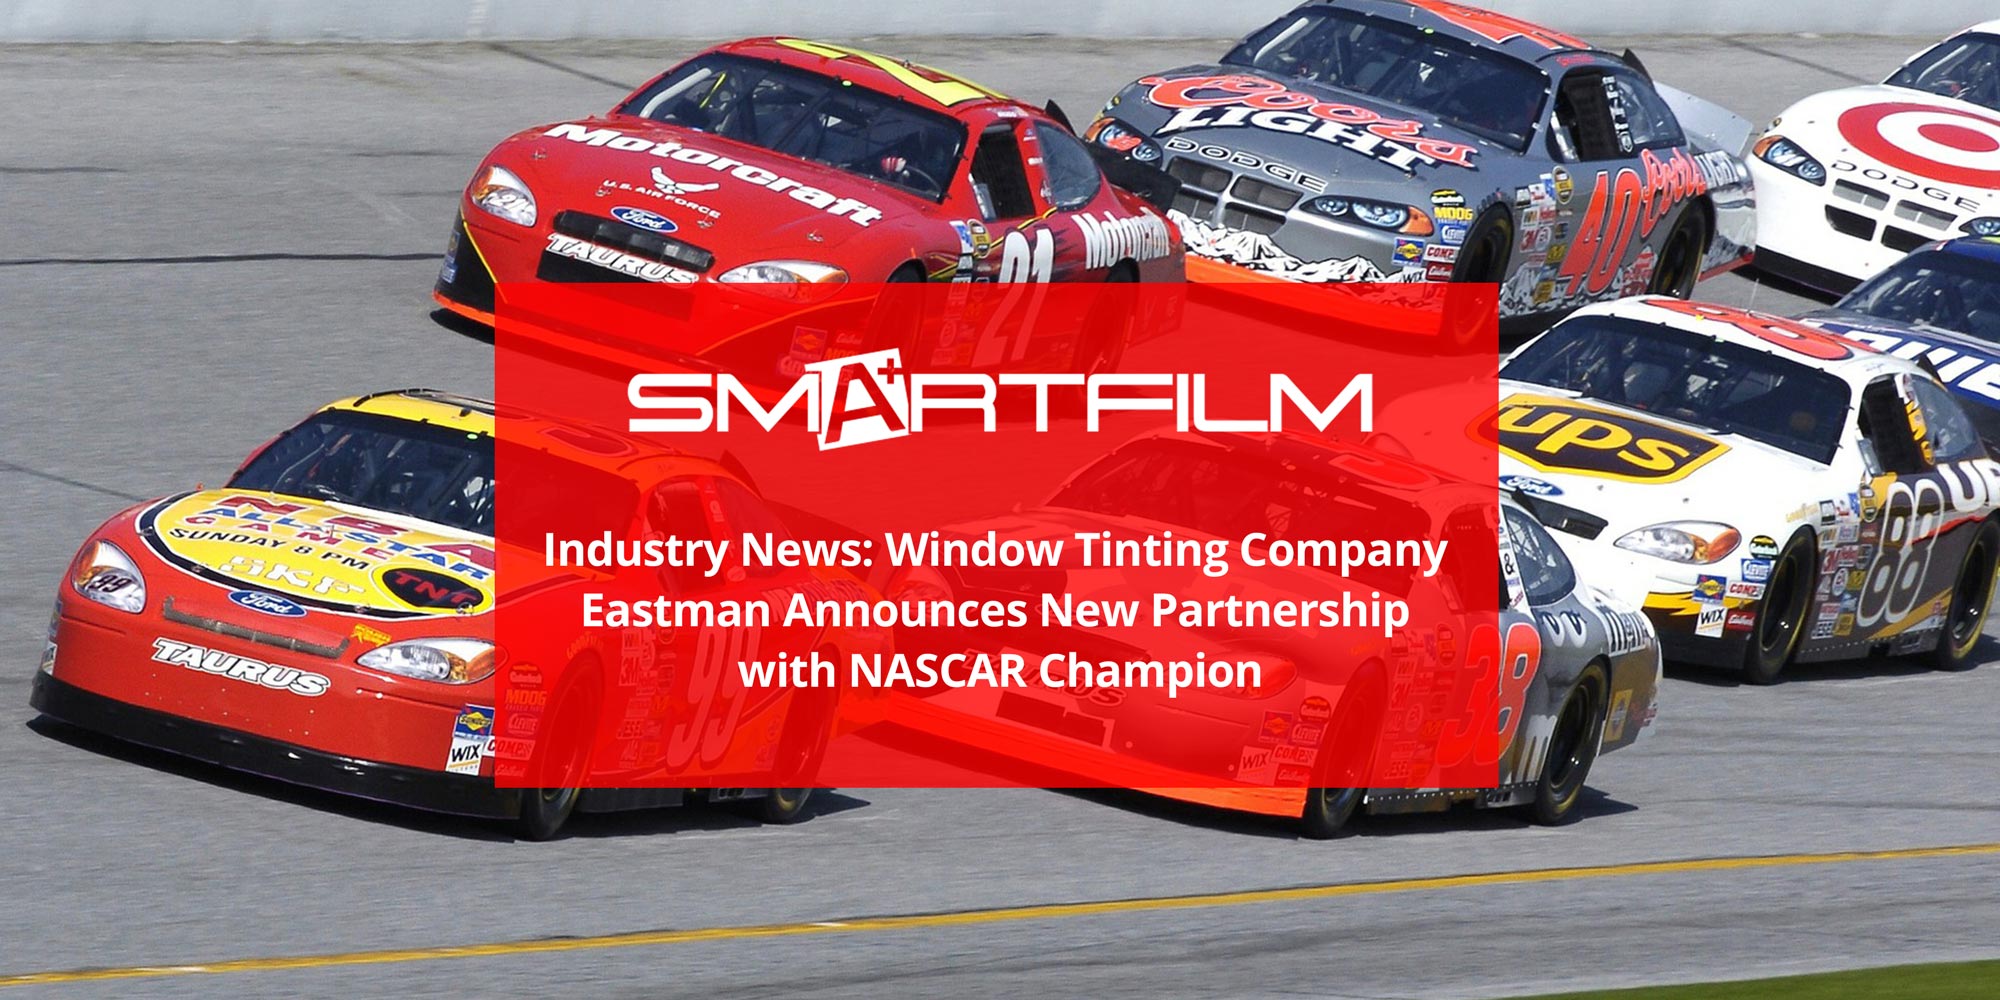 Industry News: Window Tinting Company Eastman Announces New Partnership with NASCAR Champion